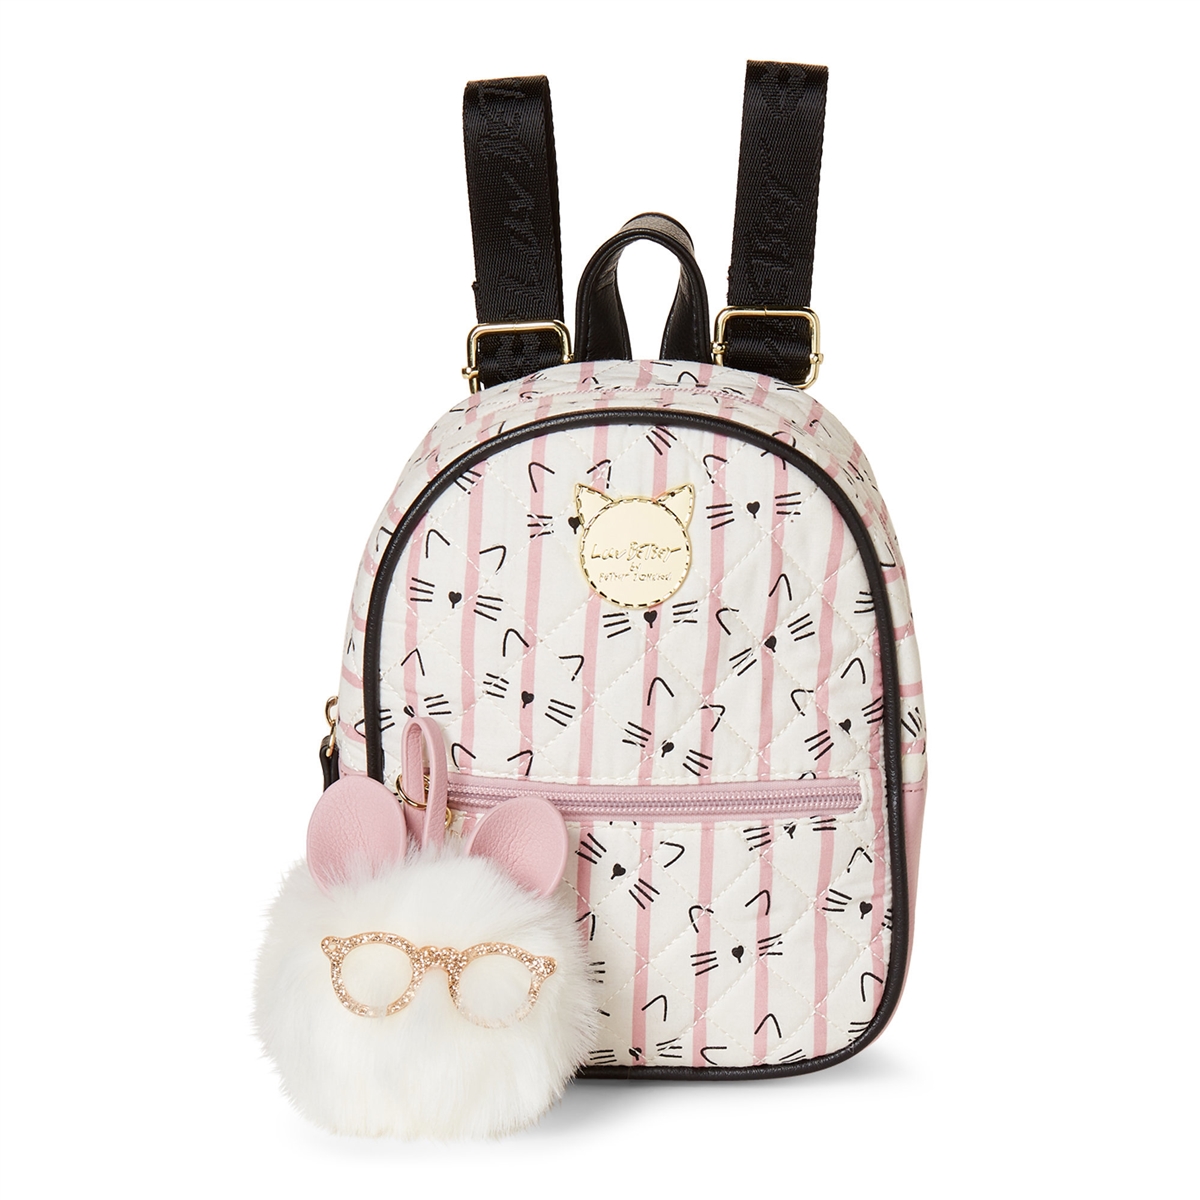 Luv Betsey Johnson Sadie Smarty Cat Micro Mini Backpack, White/Pink